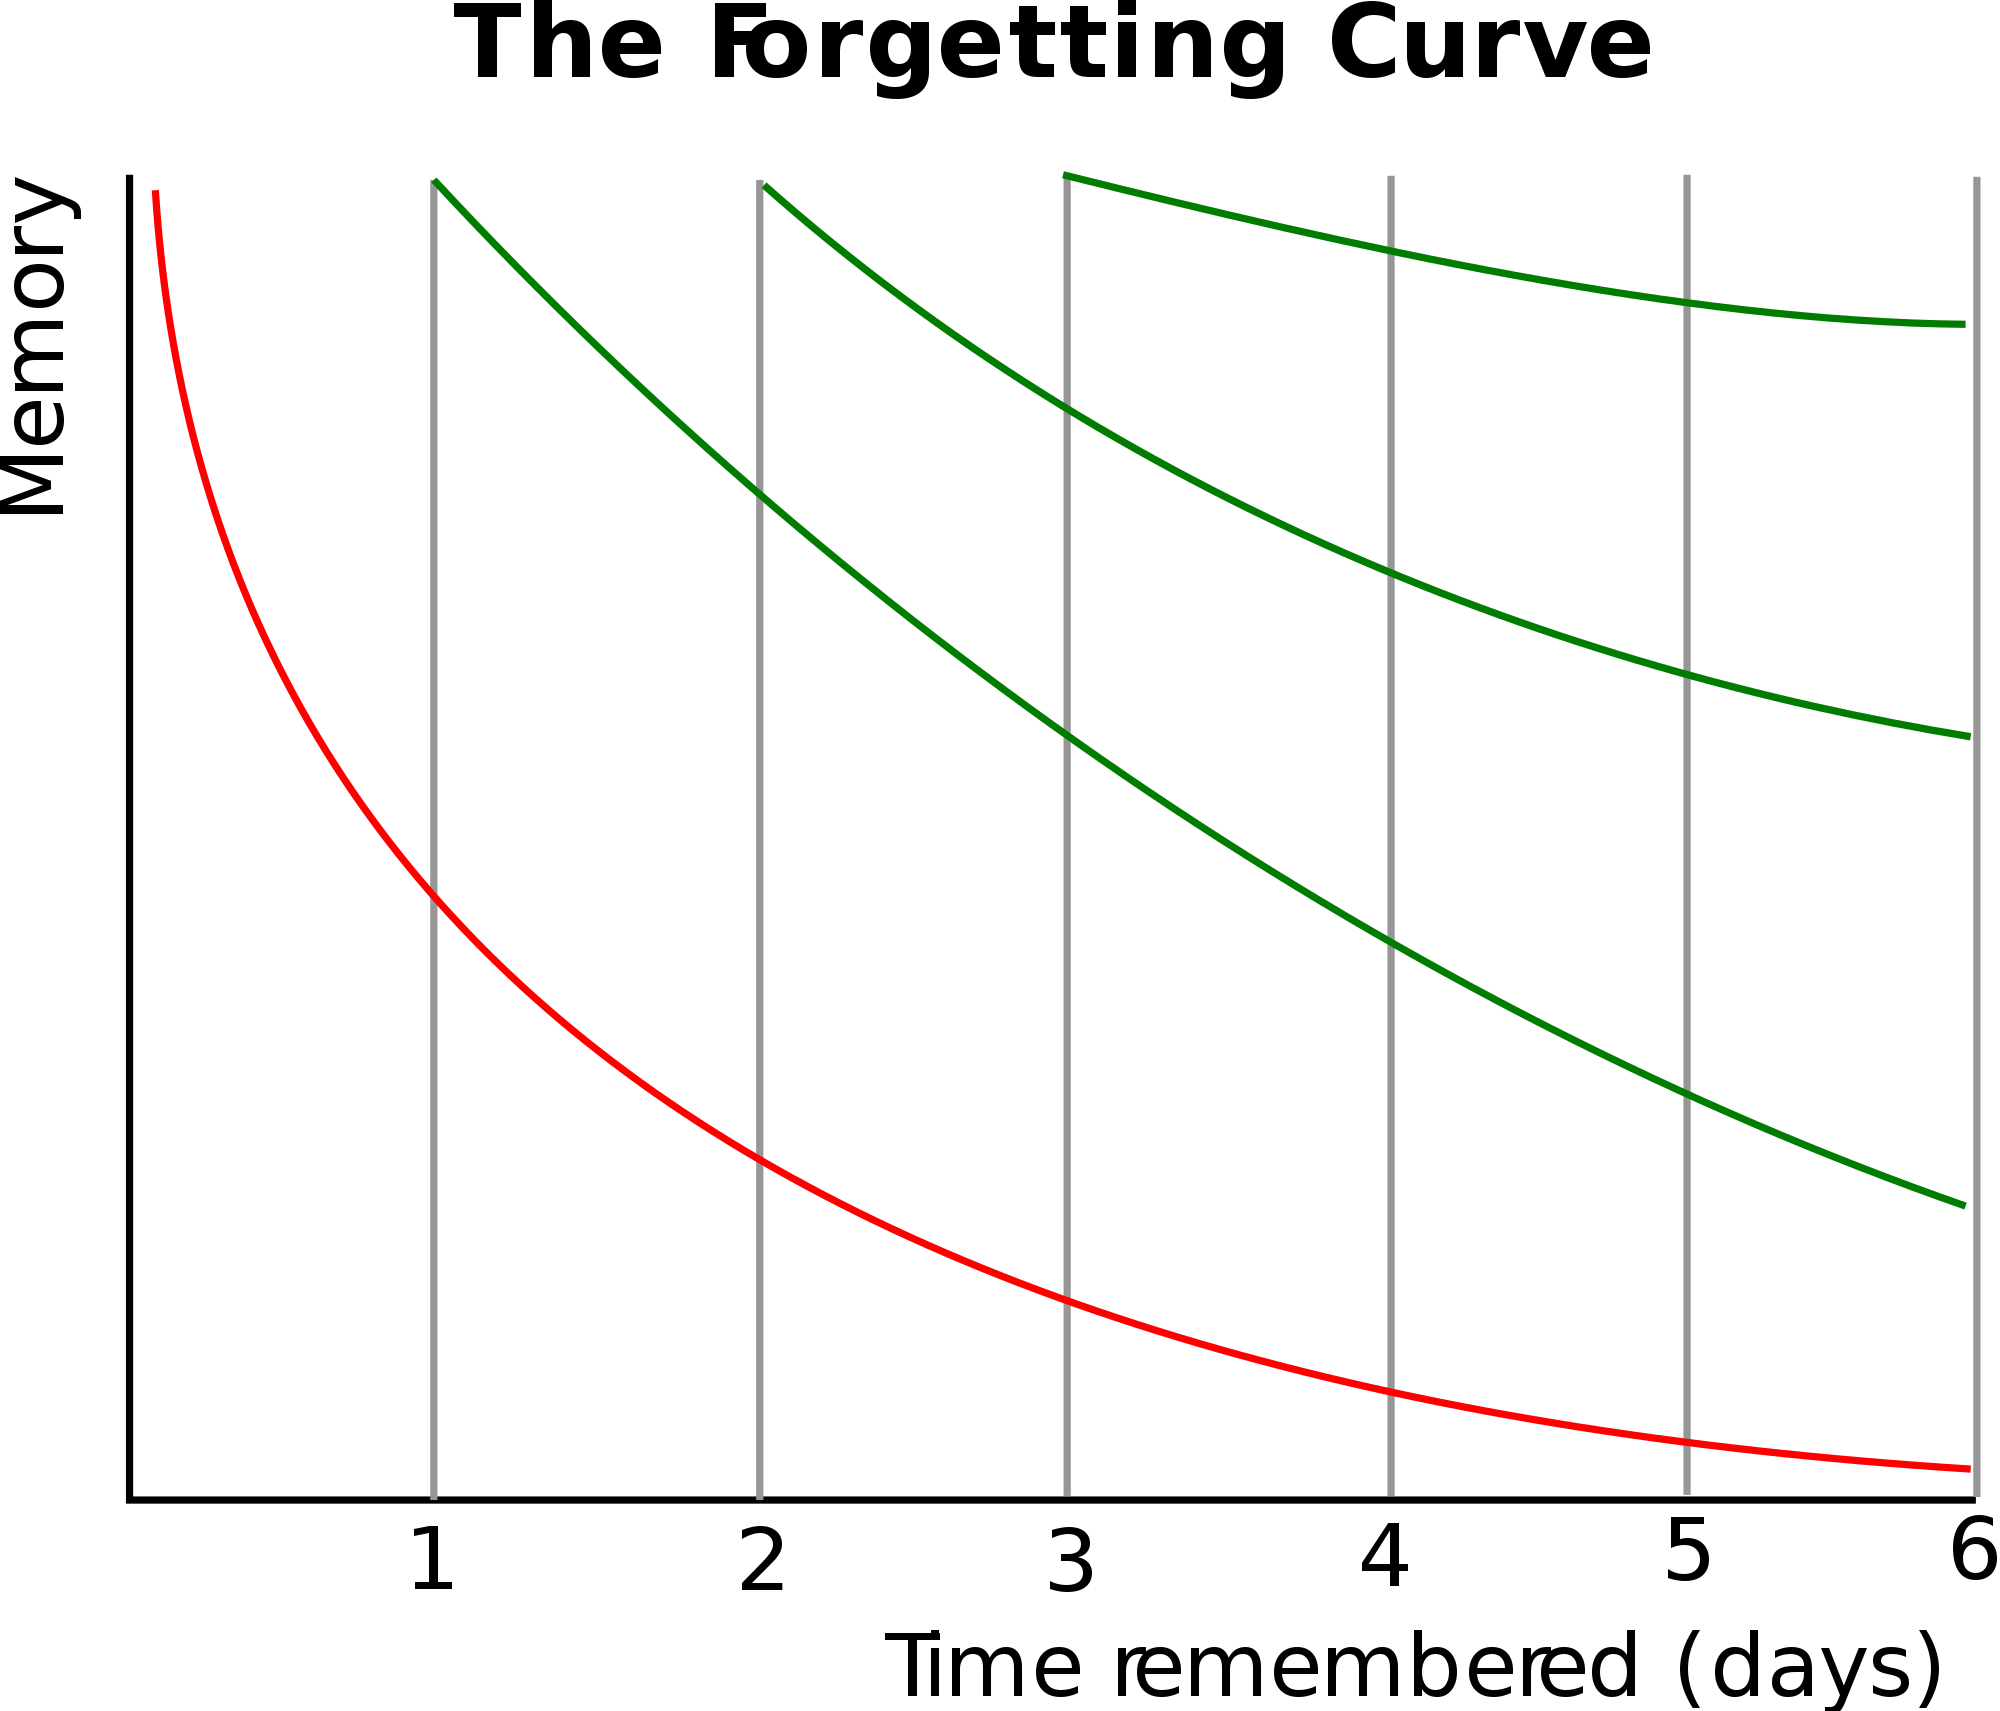 The forgetting curve illustrated in a graph